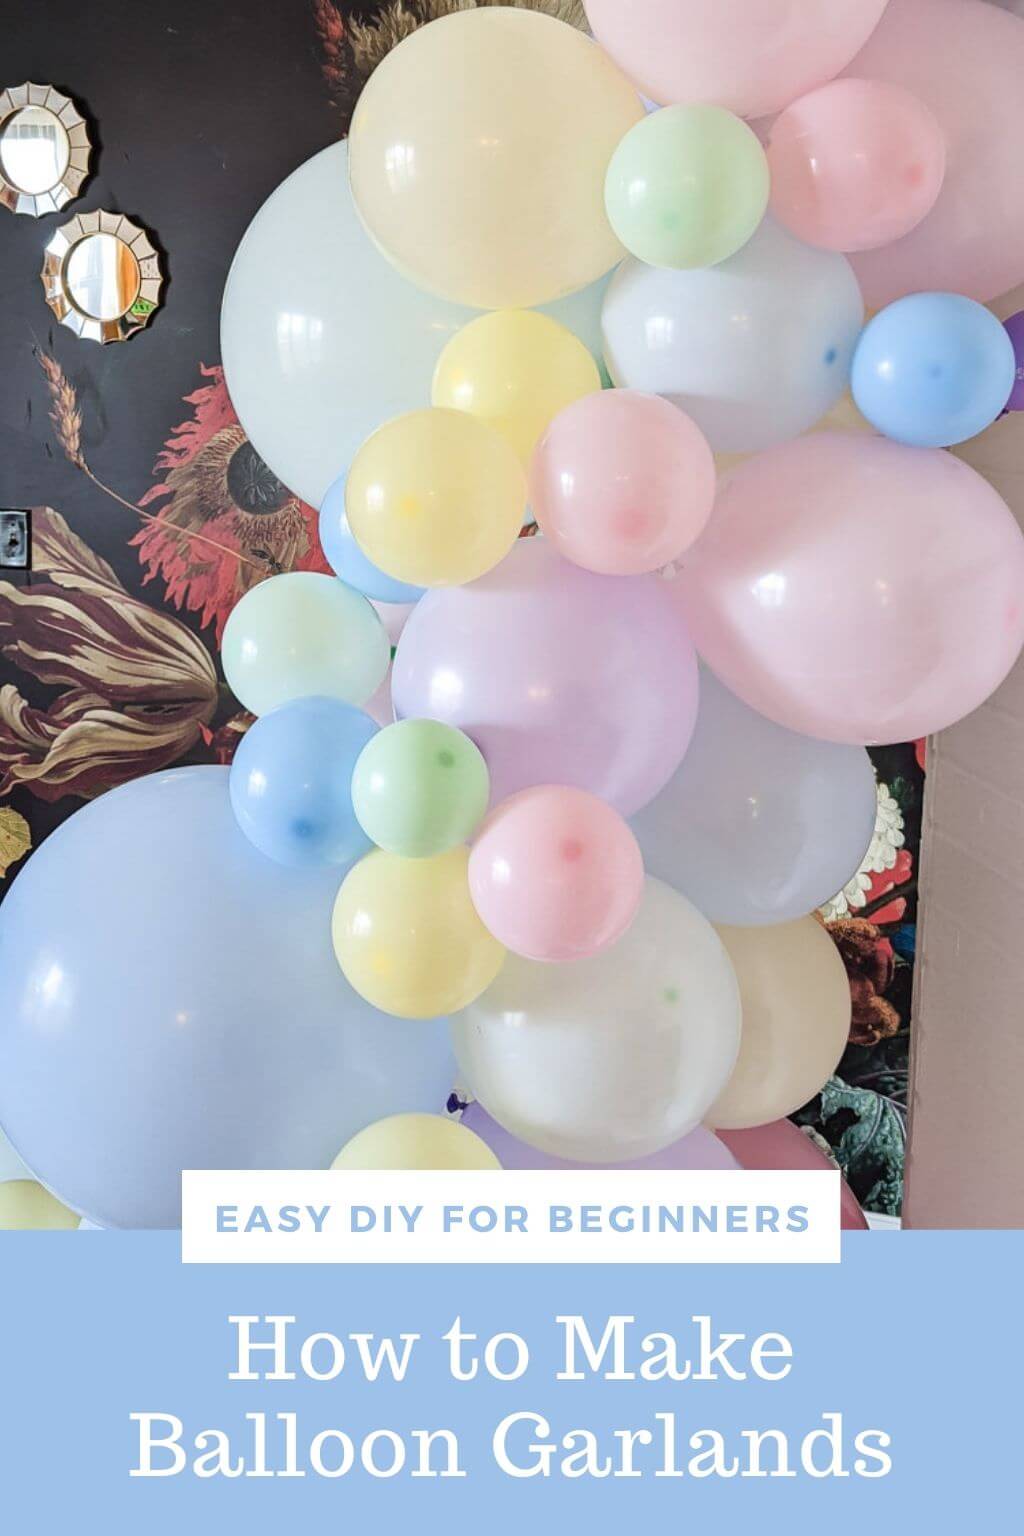 How to make a balloon garland - easy tutorial for beginners